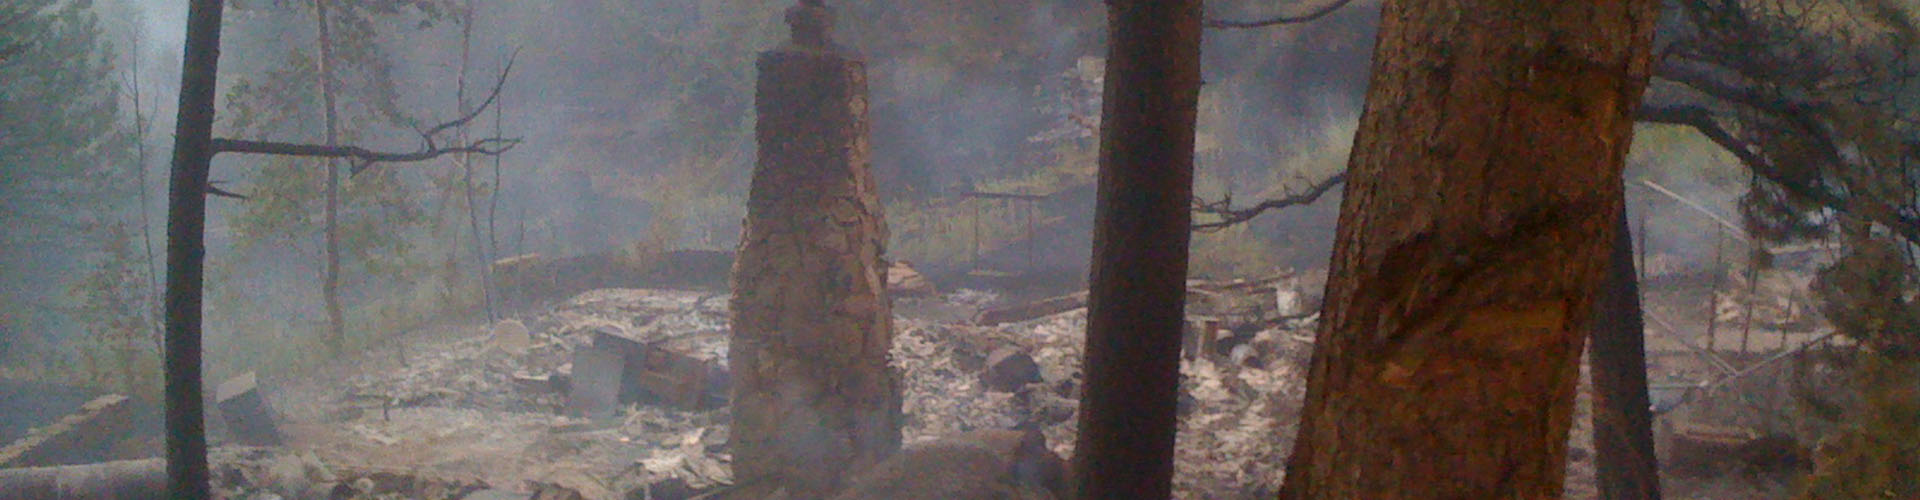 Fire destruction from the Fourmile Canyon Fire